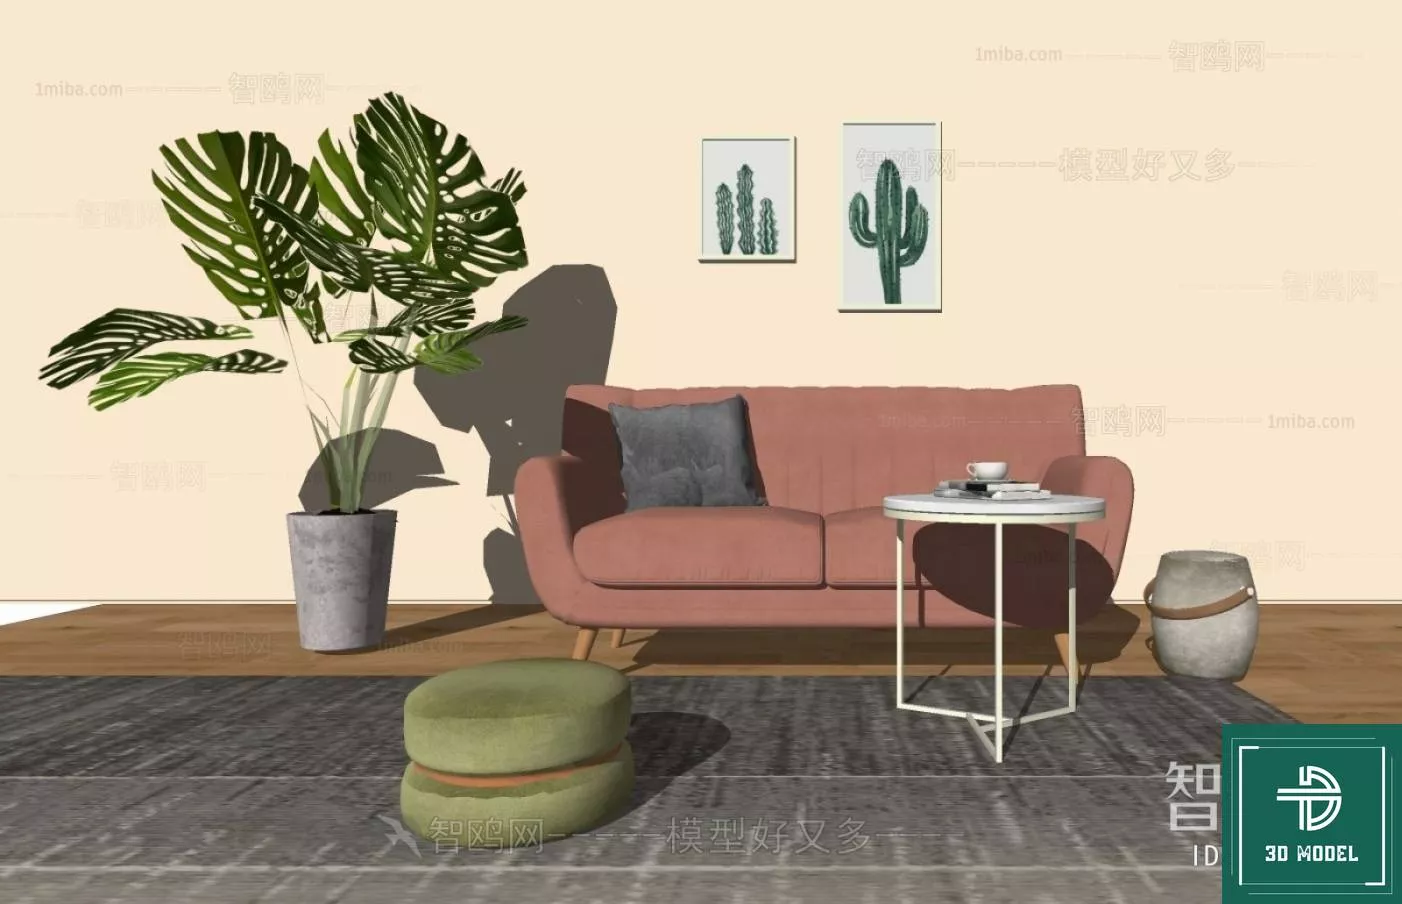 MODERN SOFA - SKETCHUP 3D MODEL - VRAY OR ENSCAPE - ID13380